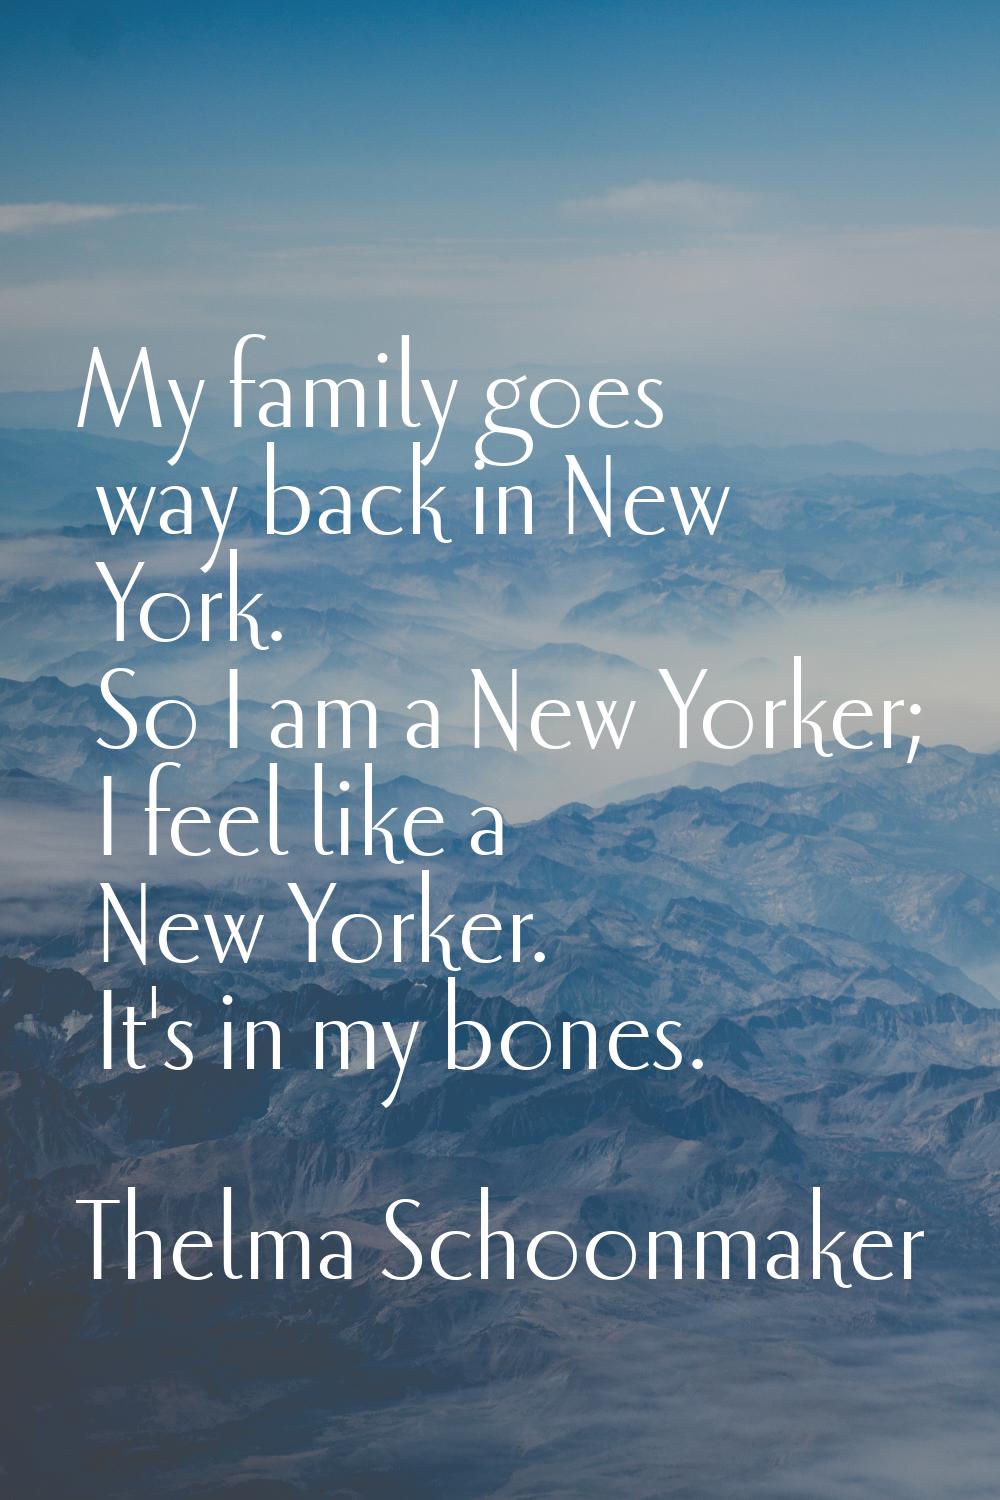 My family goes way back in New York. So I am a New Yorker; I feel like a New Yorker. It's in my bon